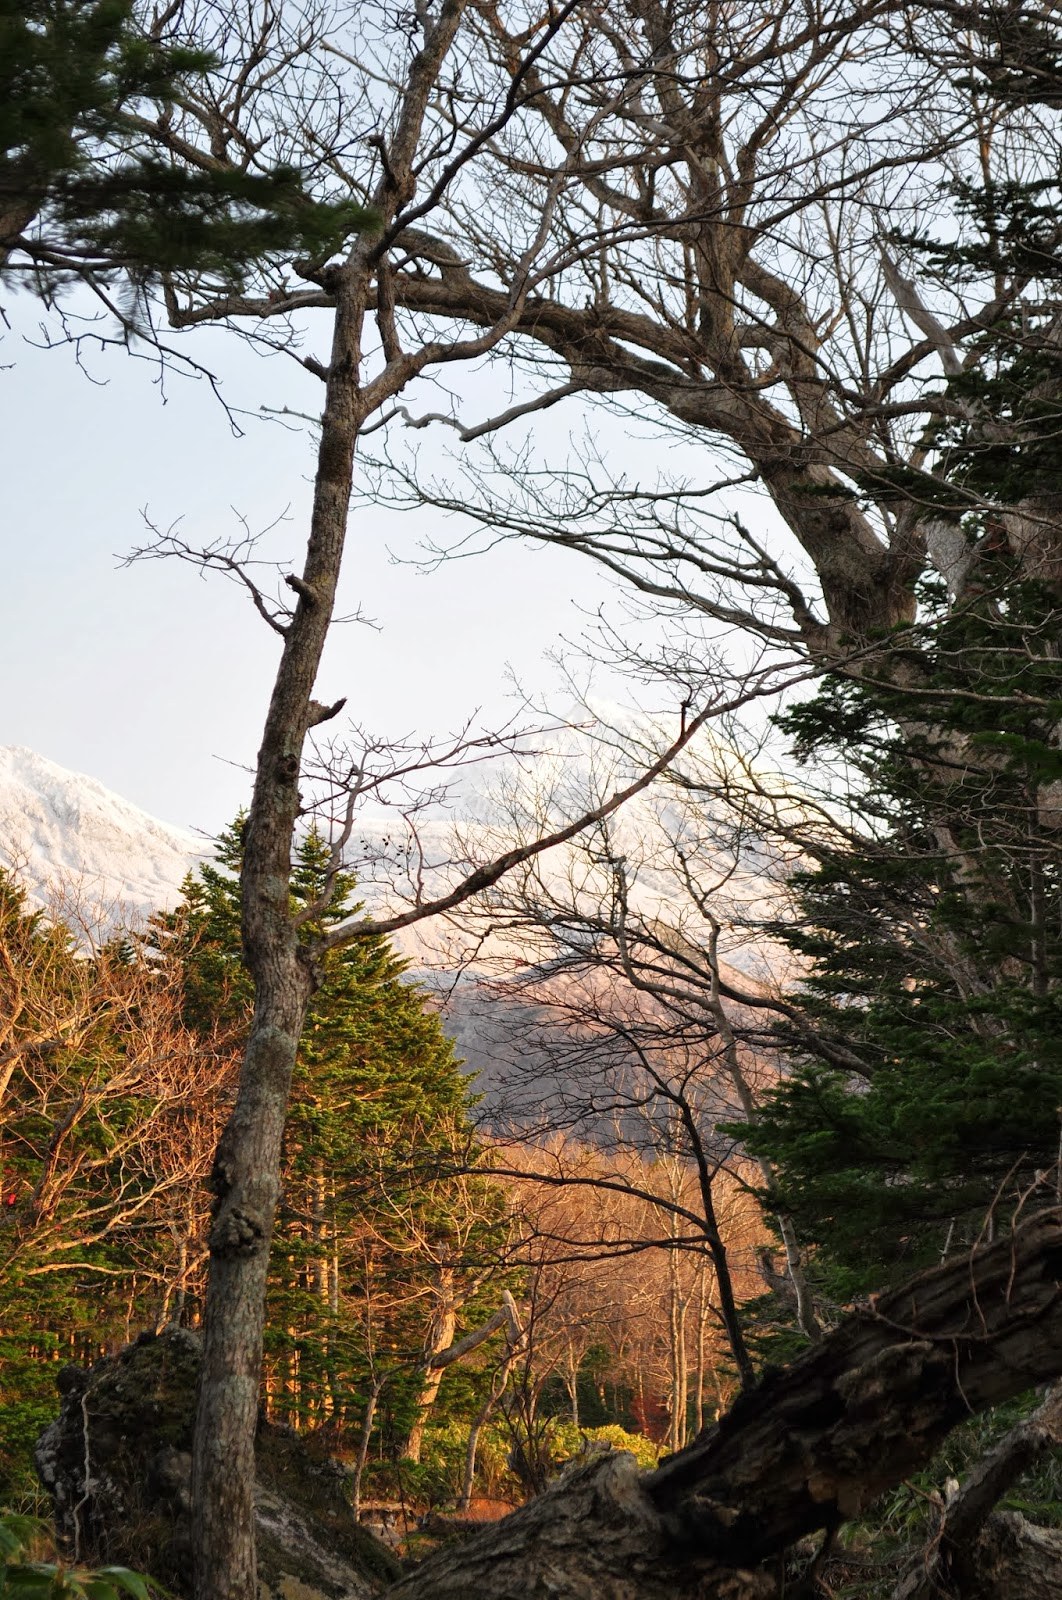 Low sun on the dramatic mountains of Shiretoko behind some denuded trees in the foreground